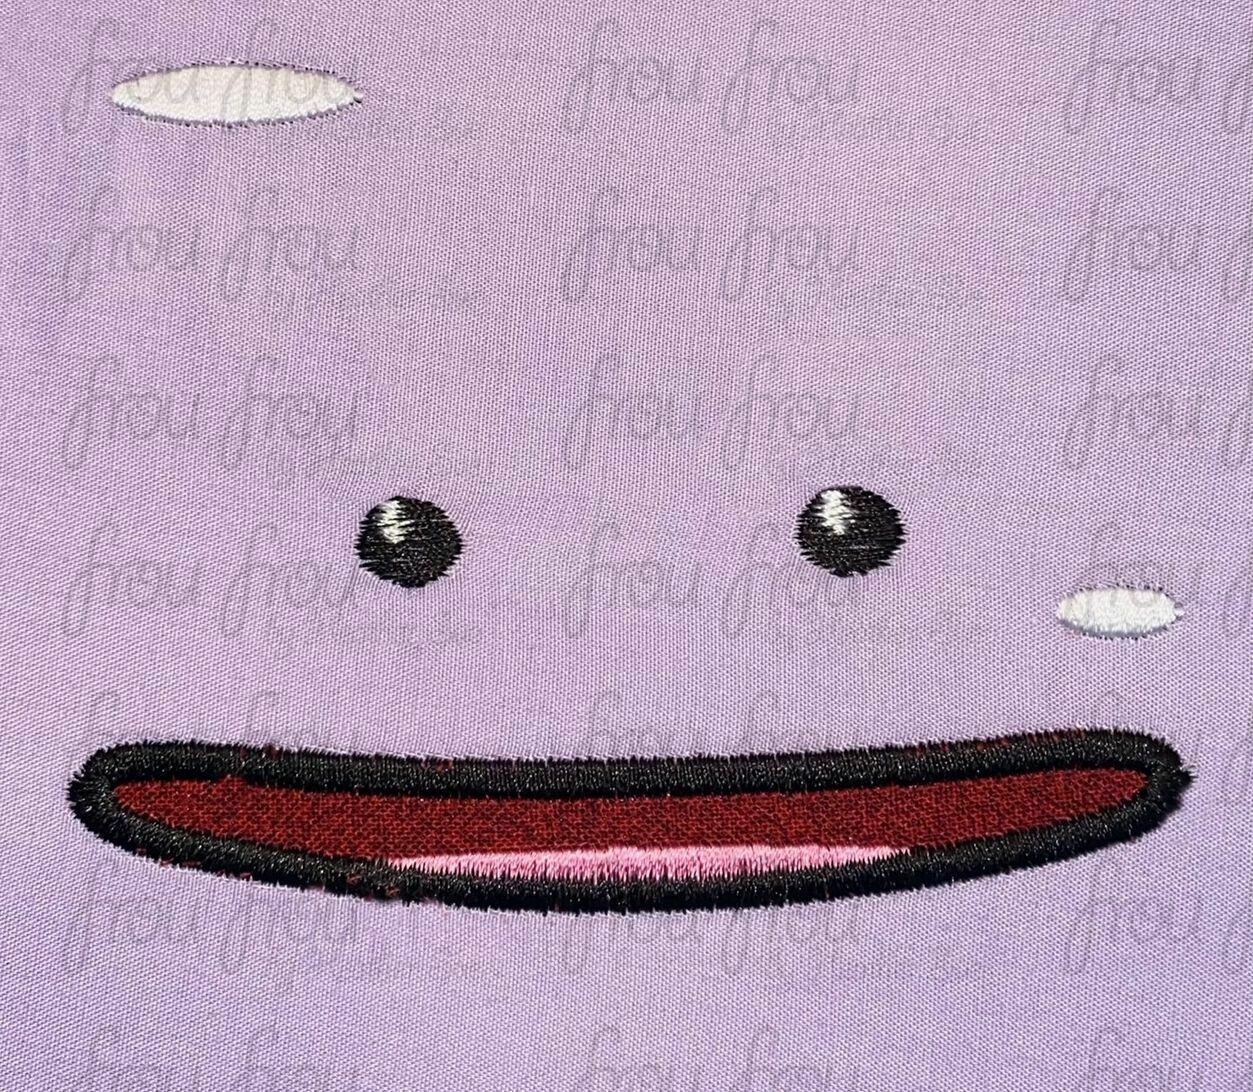 Diddo Poke Man Just Face Machine Applique and filled Embroidery Design 2